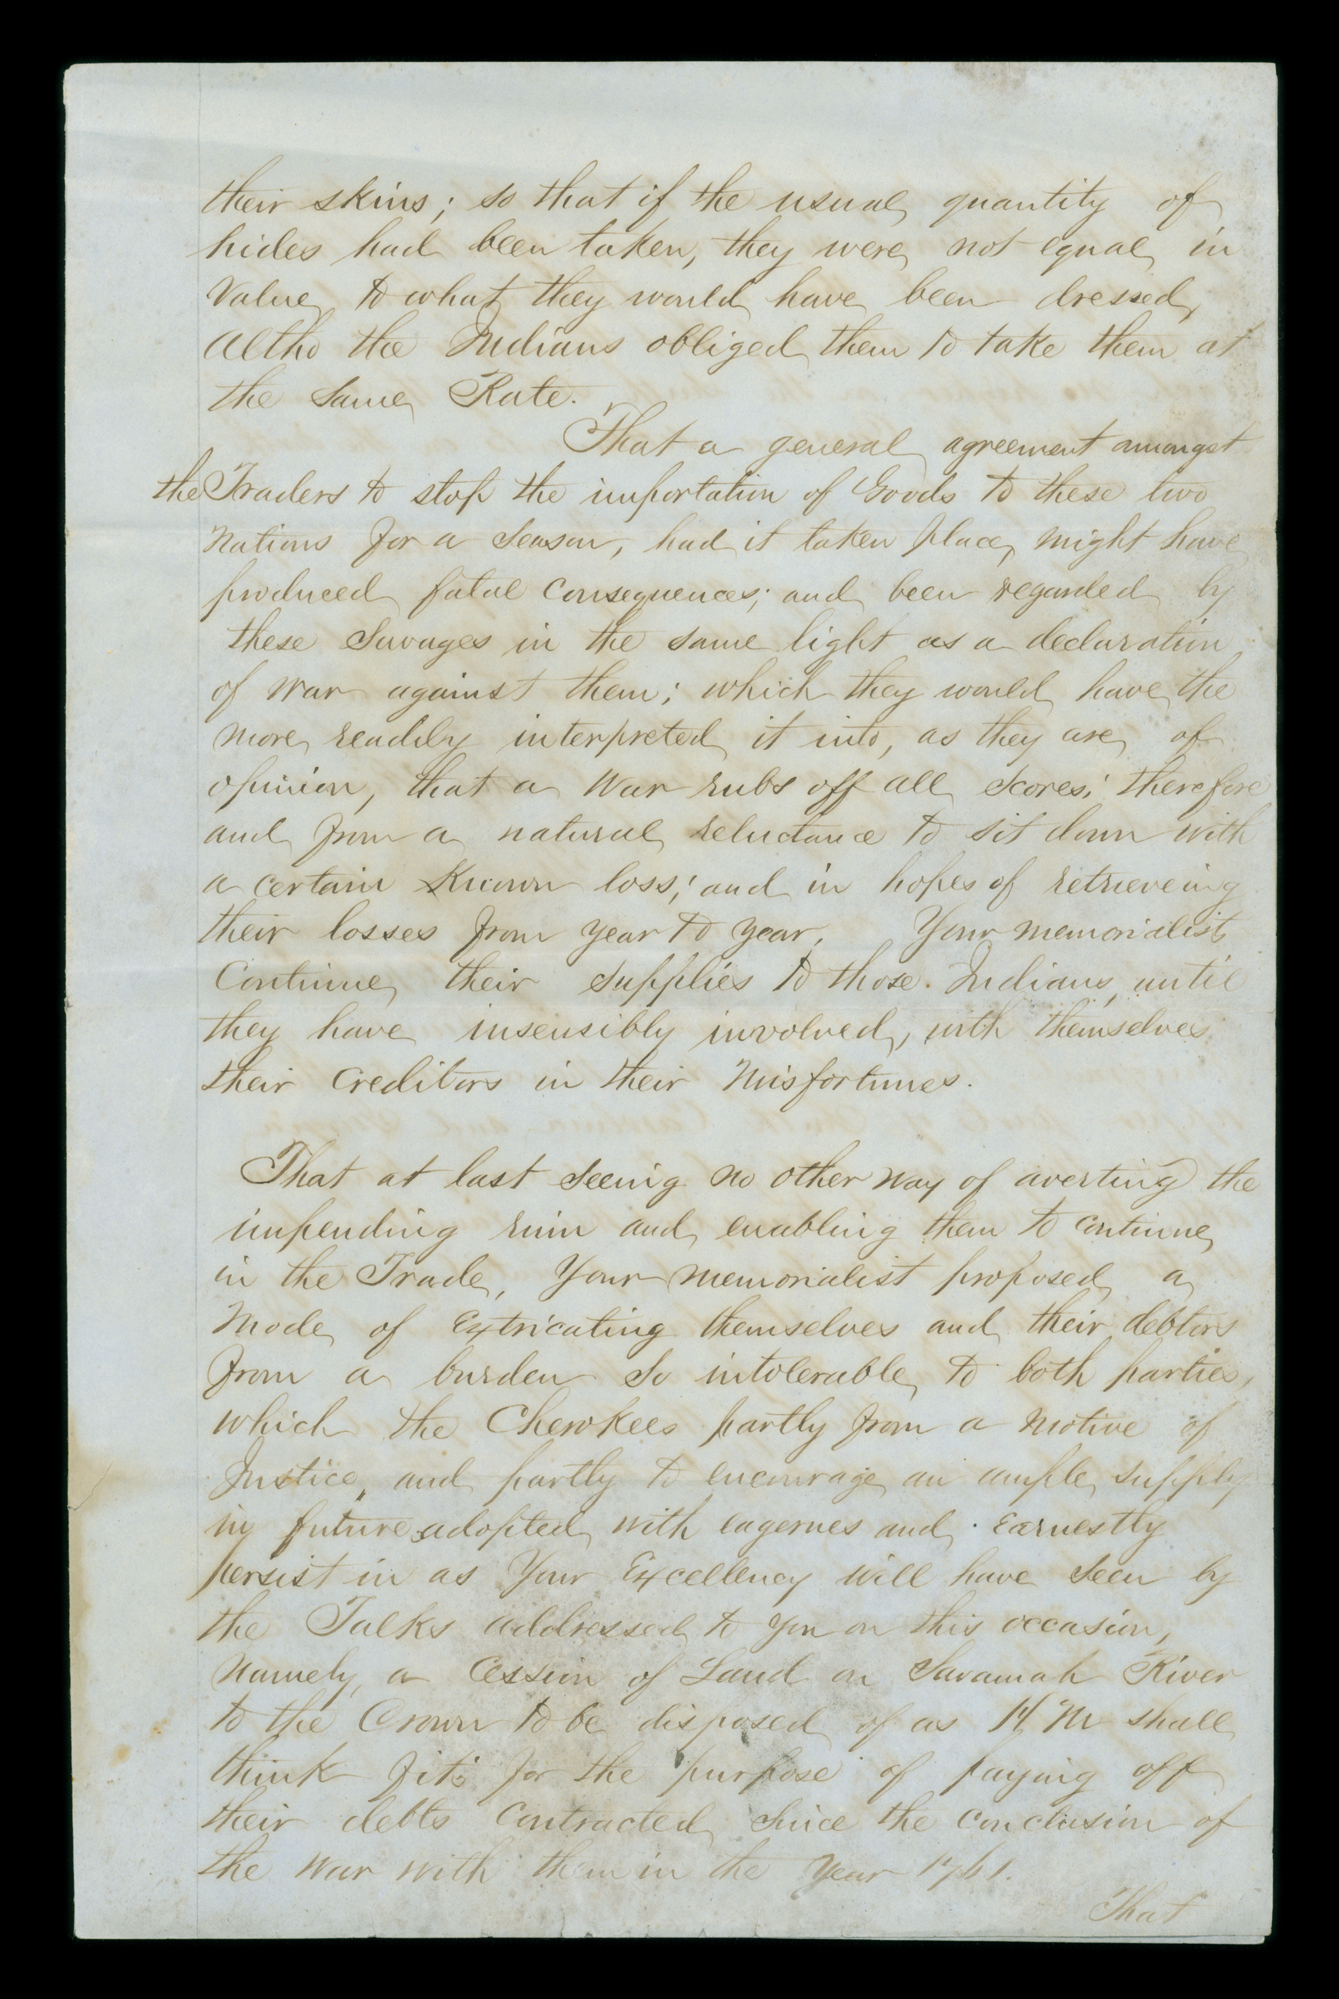 Miscellaneous papers relating to the settlement of the Galphin Claim, Memorial, Page 3